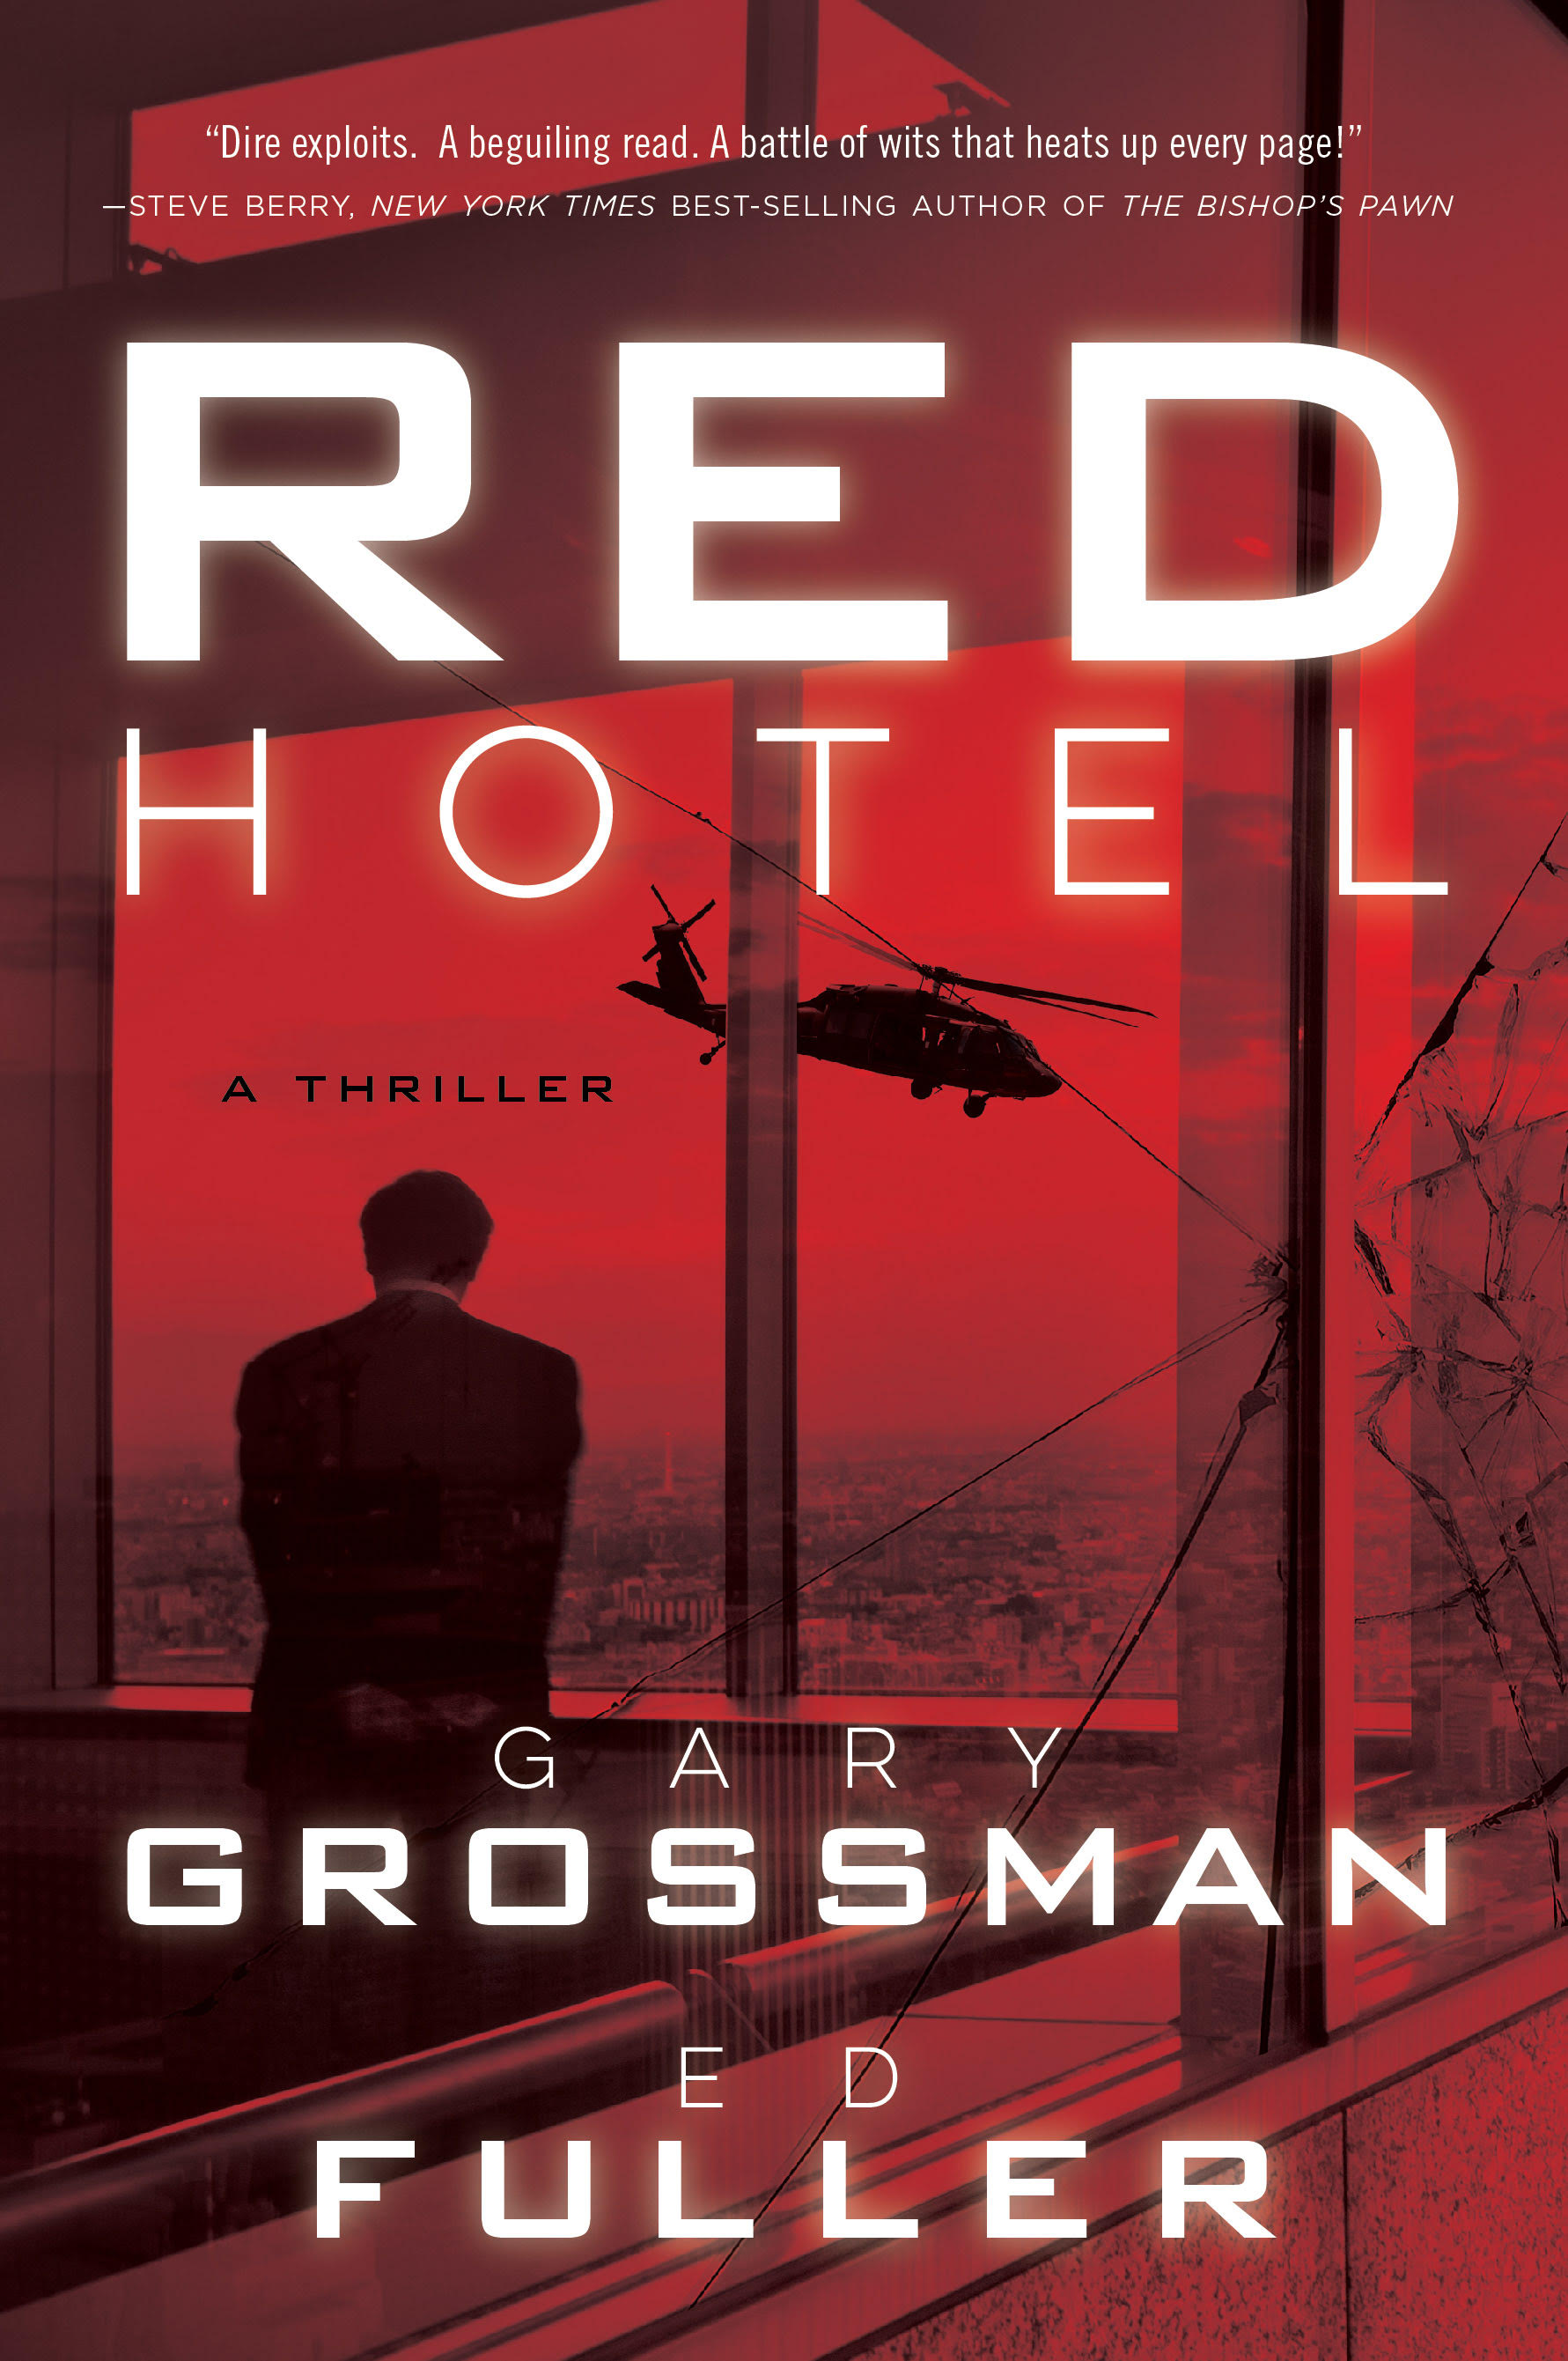 The cover of the first book of the Red Hotel Series titled Red Hotel. Written by Ed Fuller and Gary Grossman